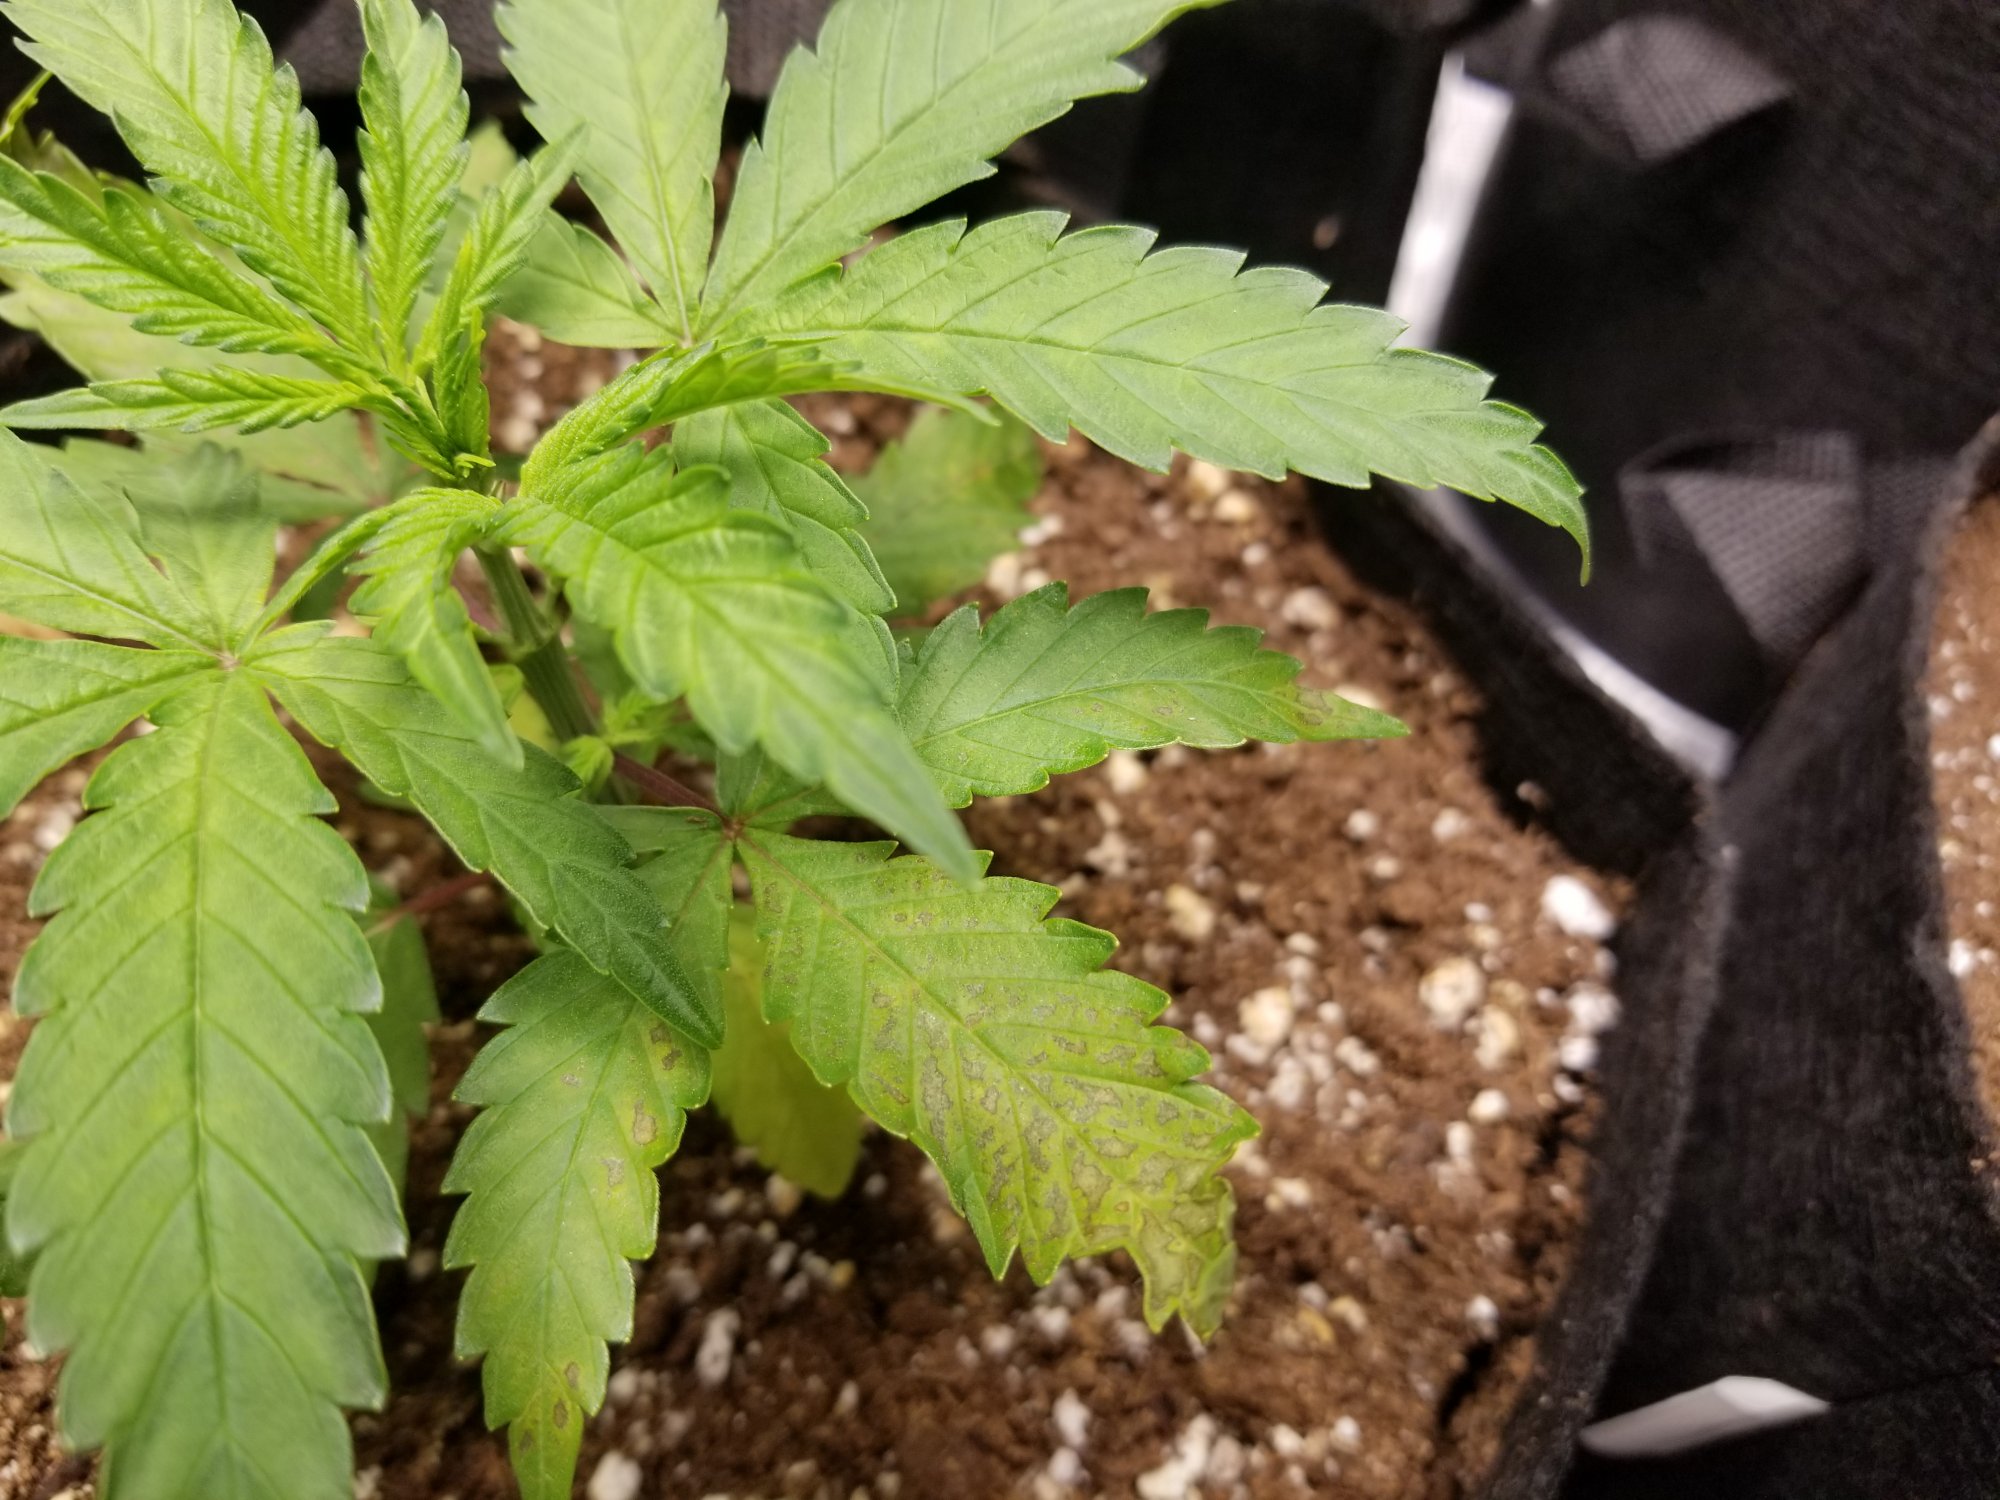 Plants yellowing and brown spots